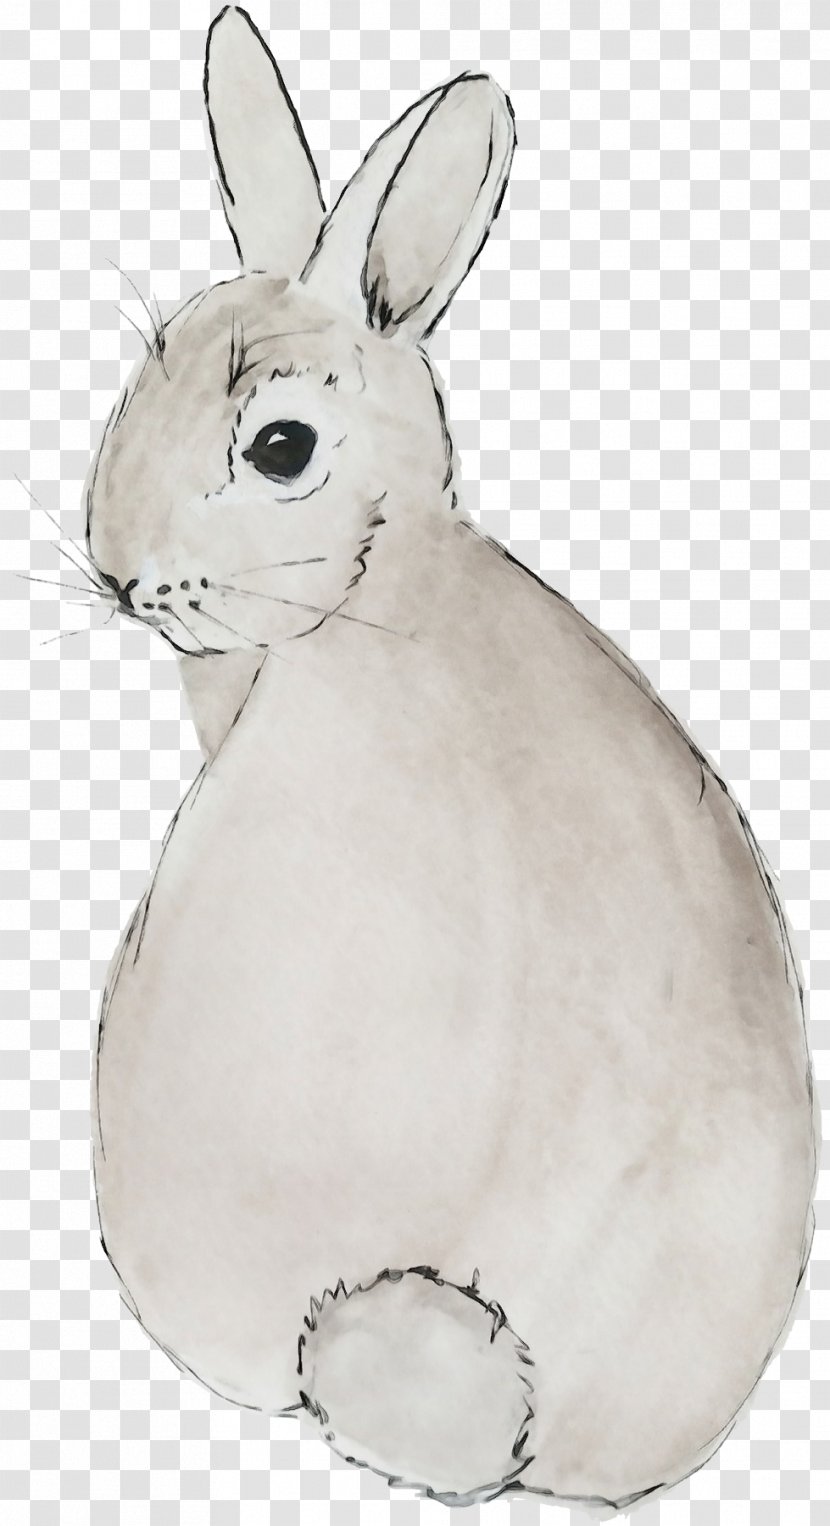 Rabbit Mountain Cottontail Domestic Rabbits And Hares White - Watercolor - Snout Arctic Hare Transparent PNG